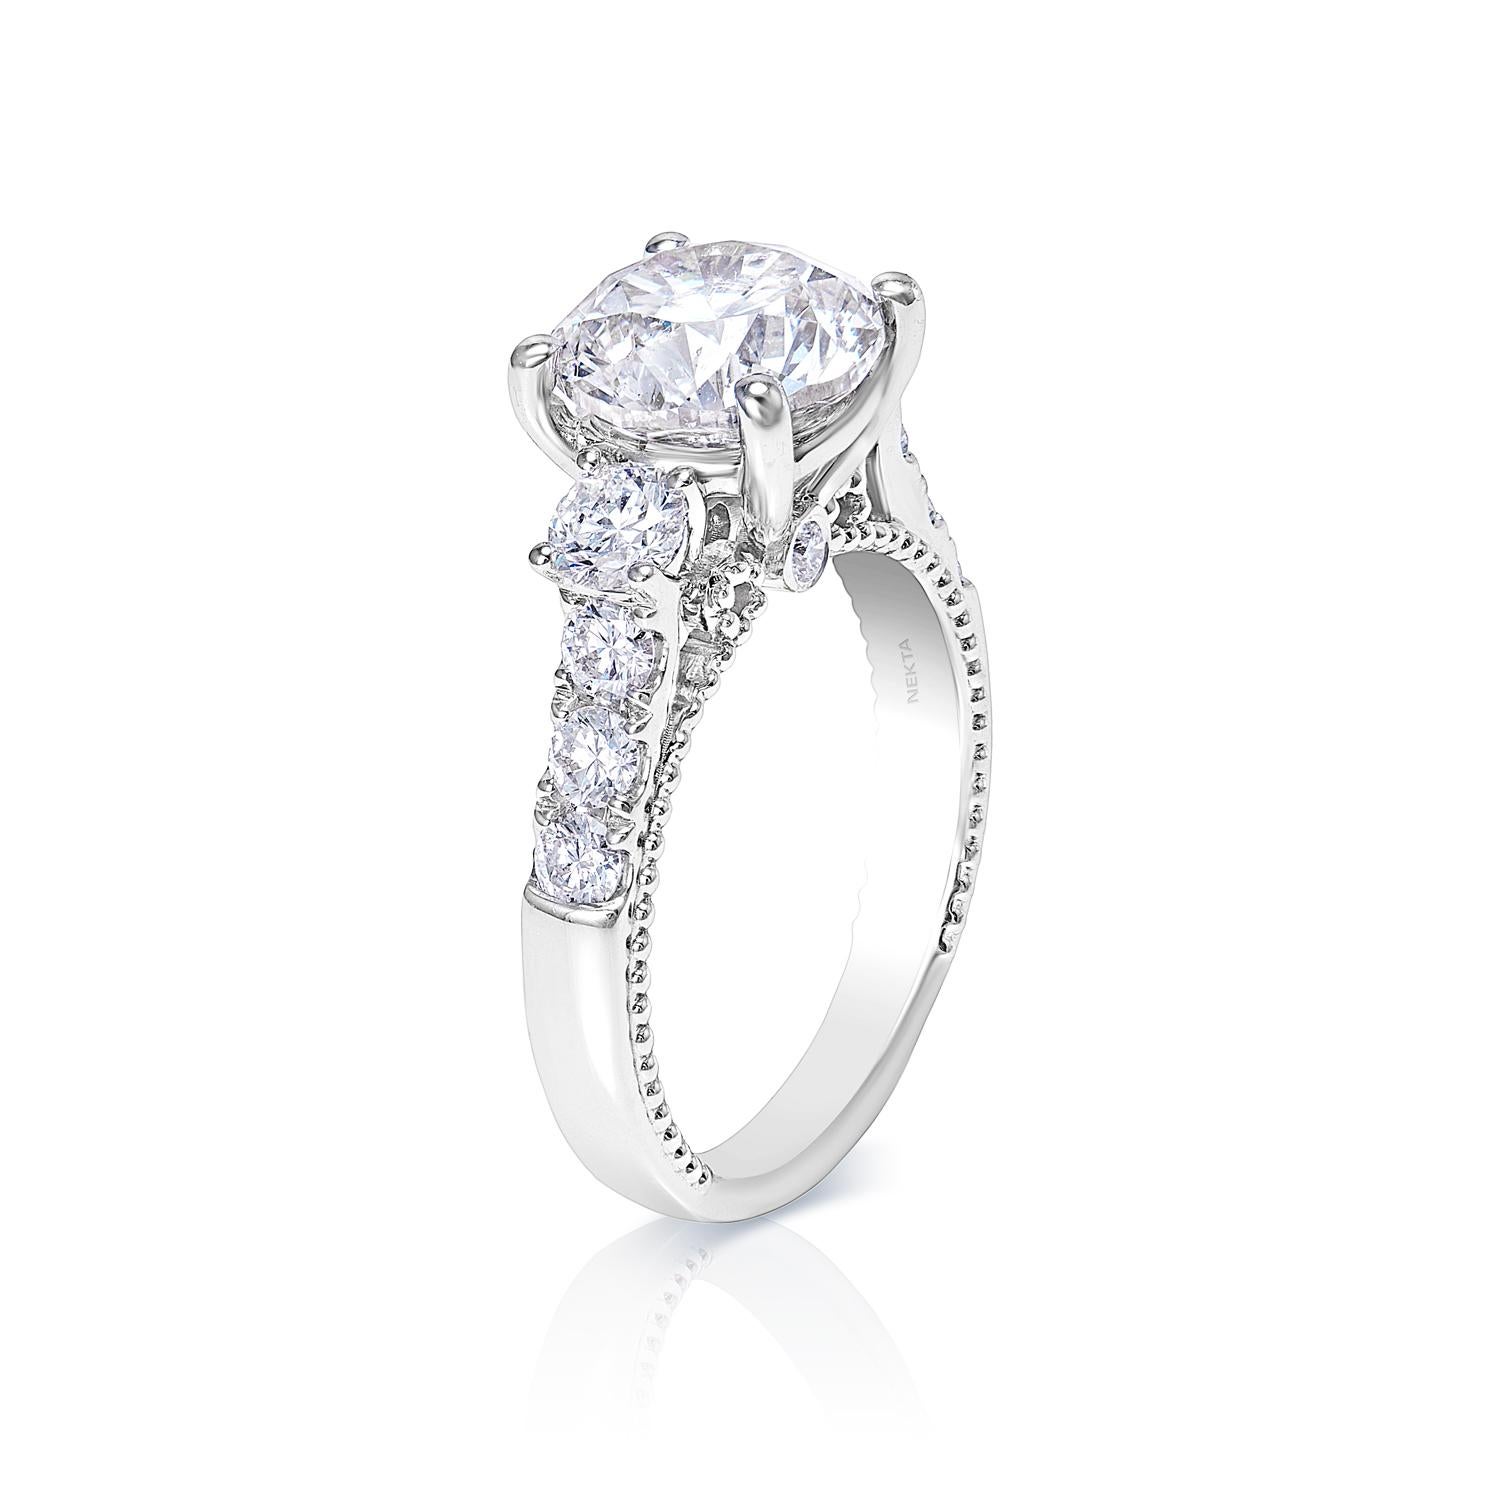 Round Cut 4 Carat Round Brilliant Diamond Engagement Ring Certified G VS2 For Sale